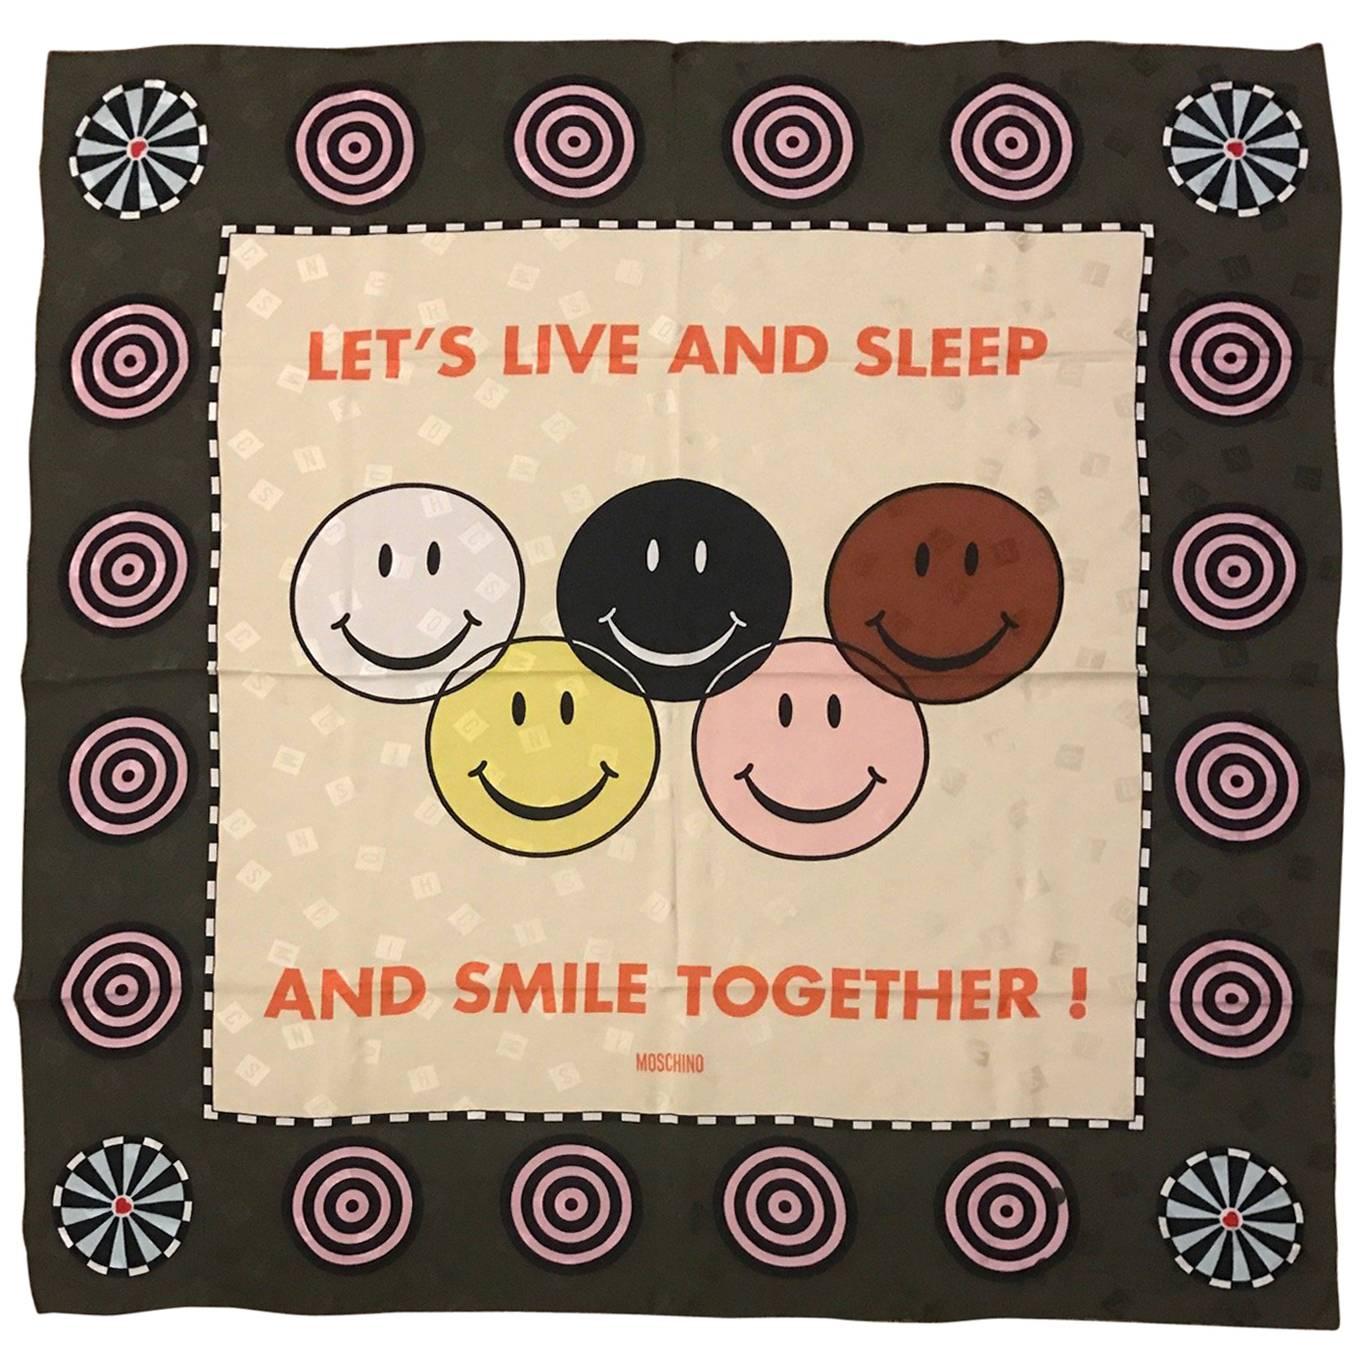 Moschino Vintage 1990s Let's Live Together Racial Harmony Smiley Face Silk Scarf